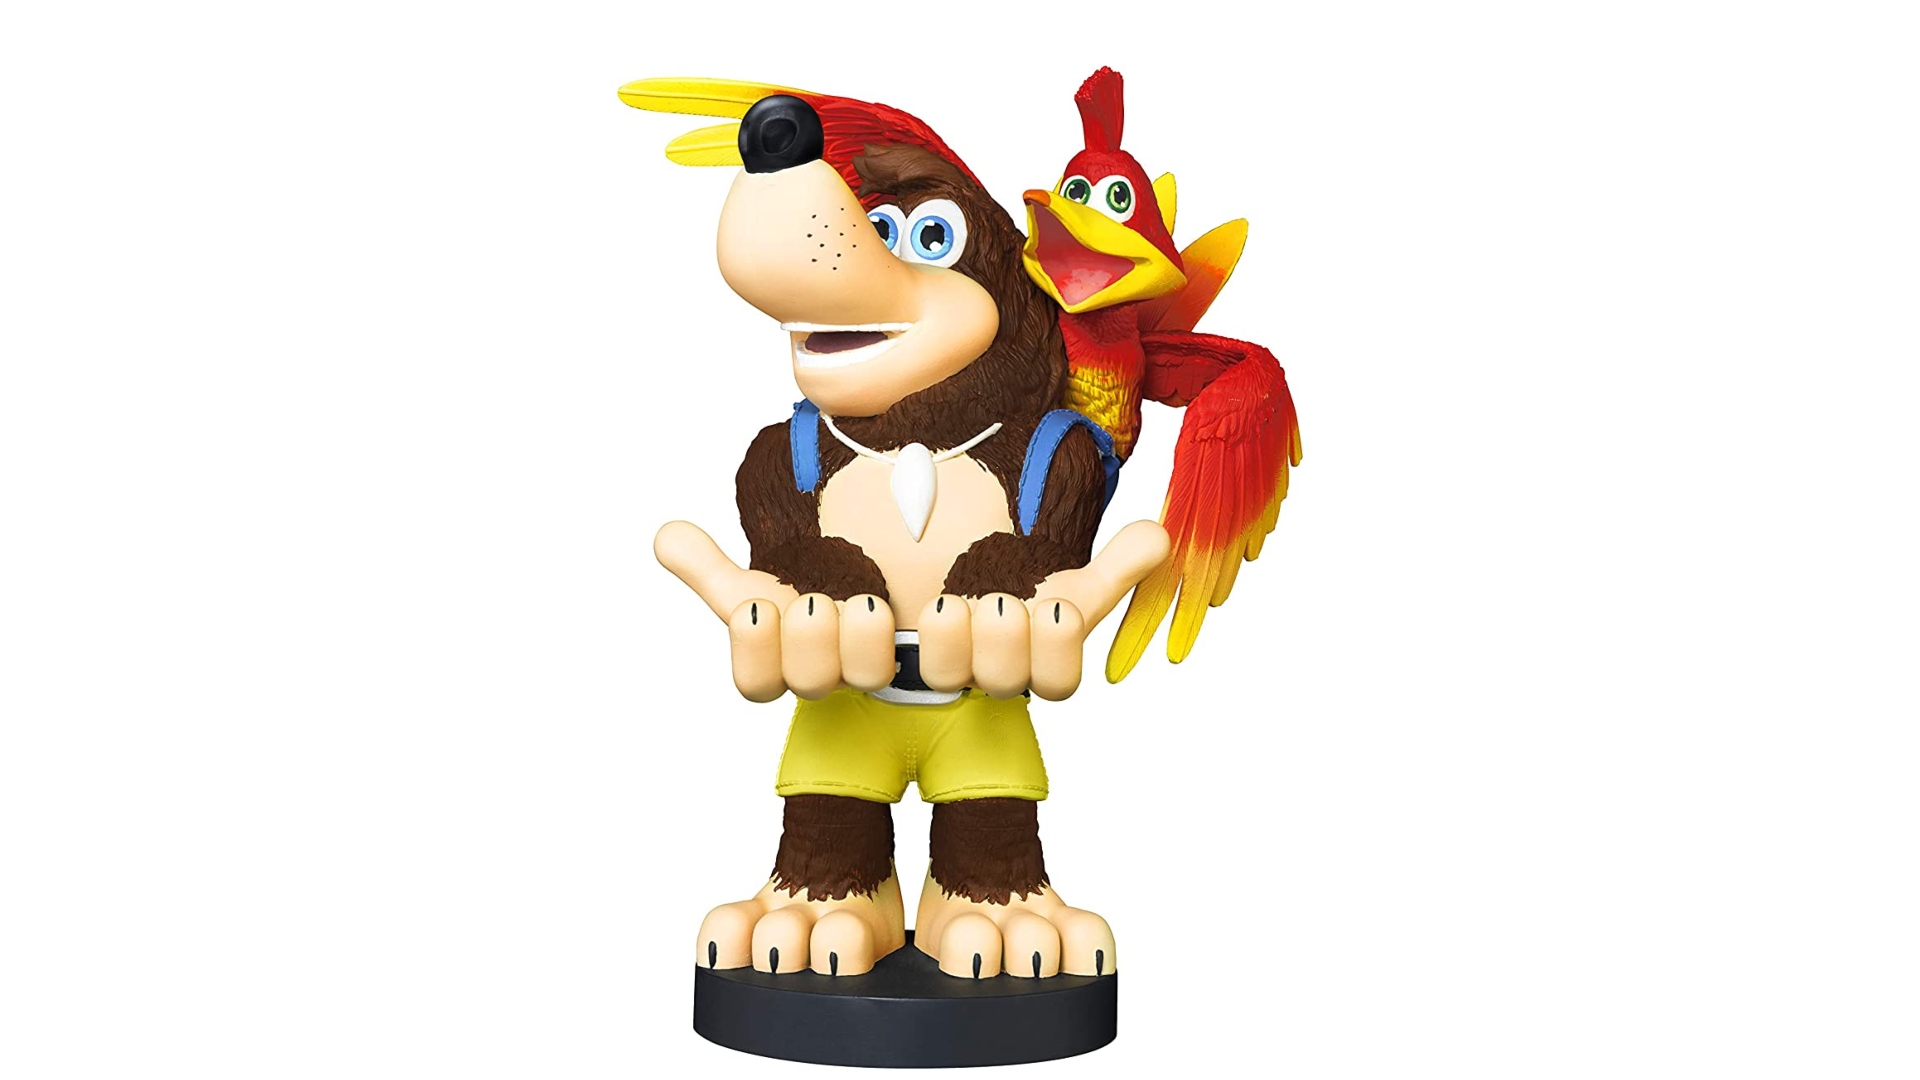 Nintendo Gifts: Image shows a Banjo-Kazooie Cable Guy controller holding figure.